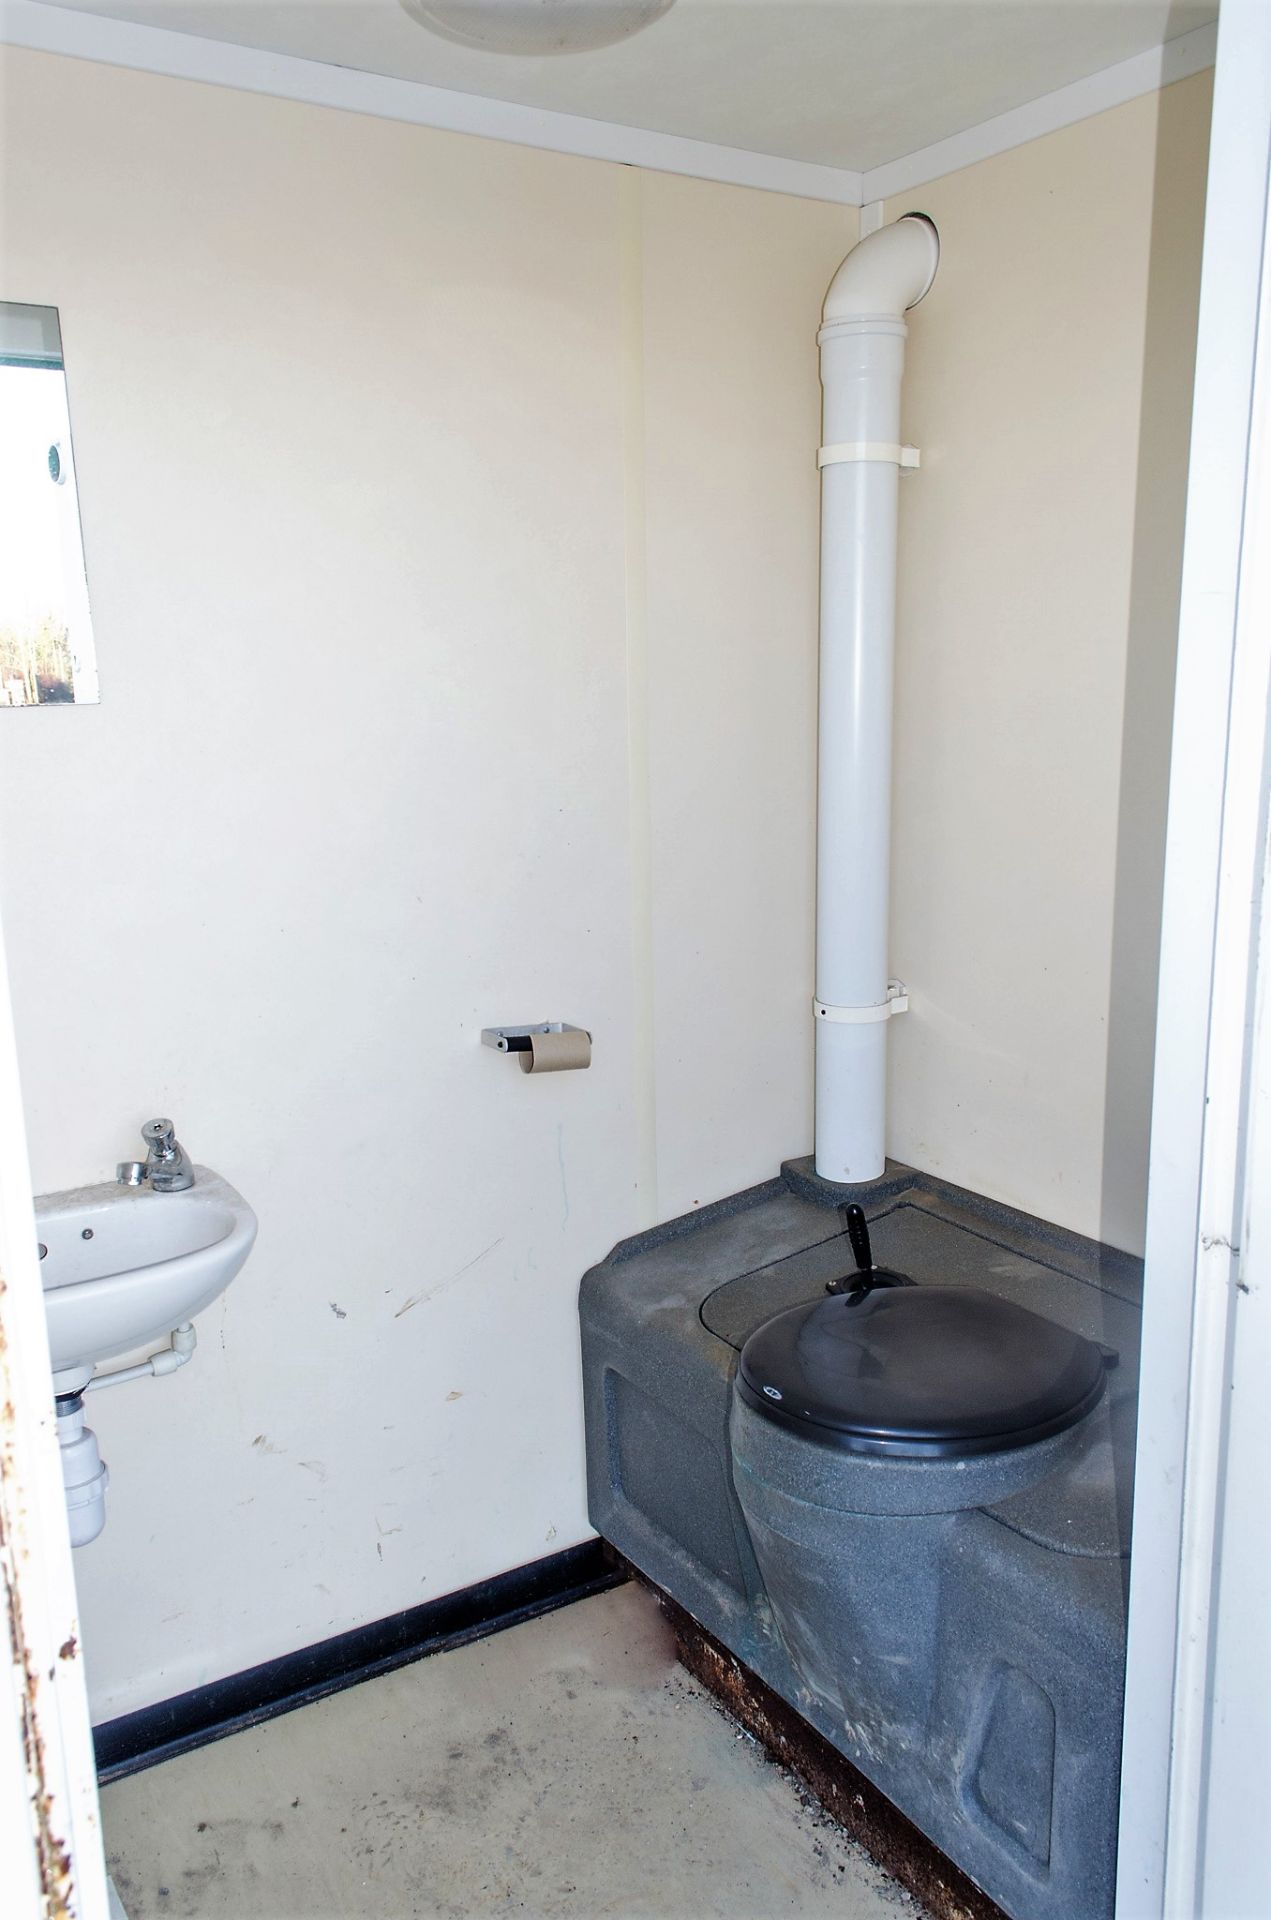 21ft x 9ft steel anti vandal welfare site unit Comprising of: canteen area, toilet & generator - Image 8 of 12